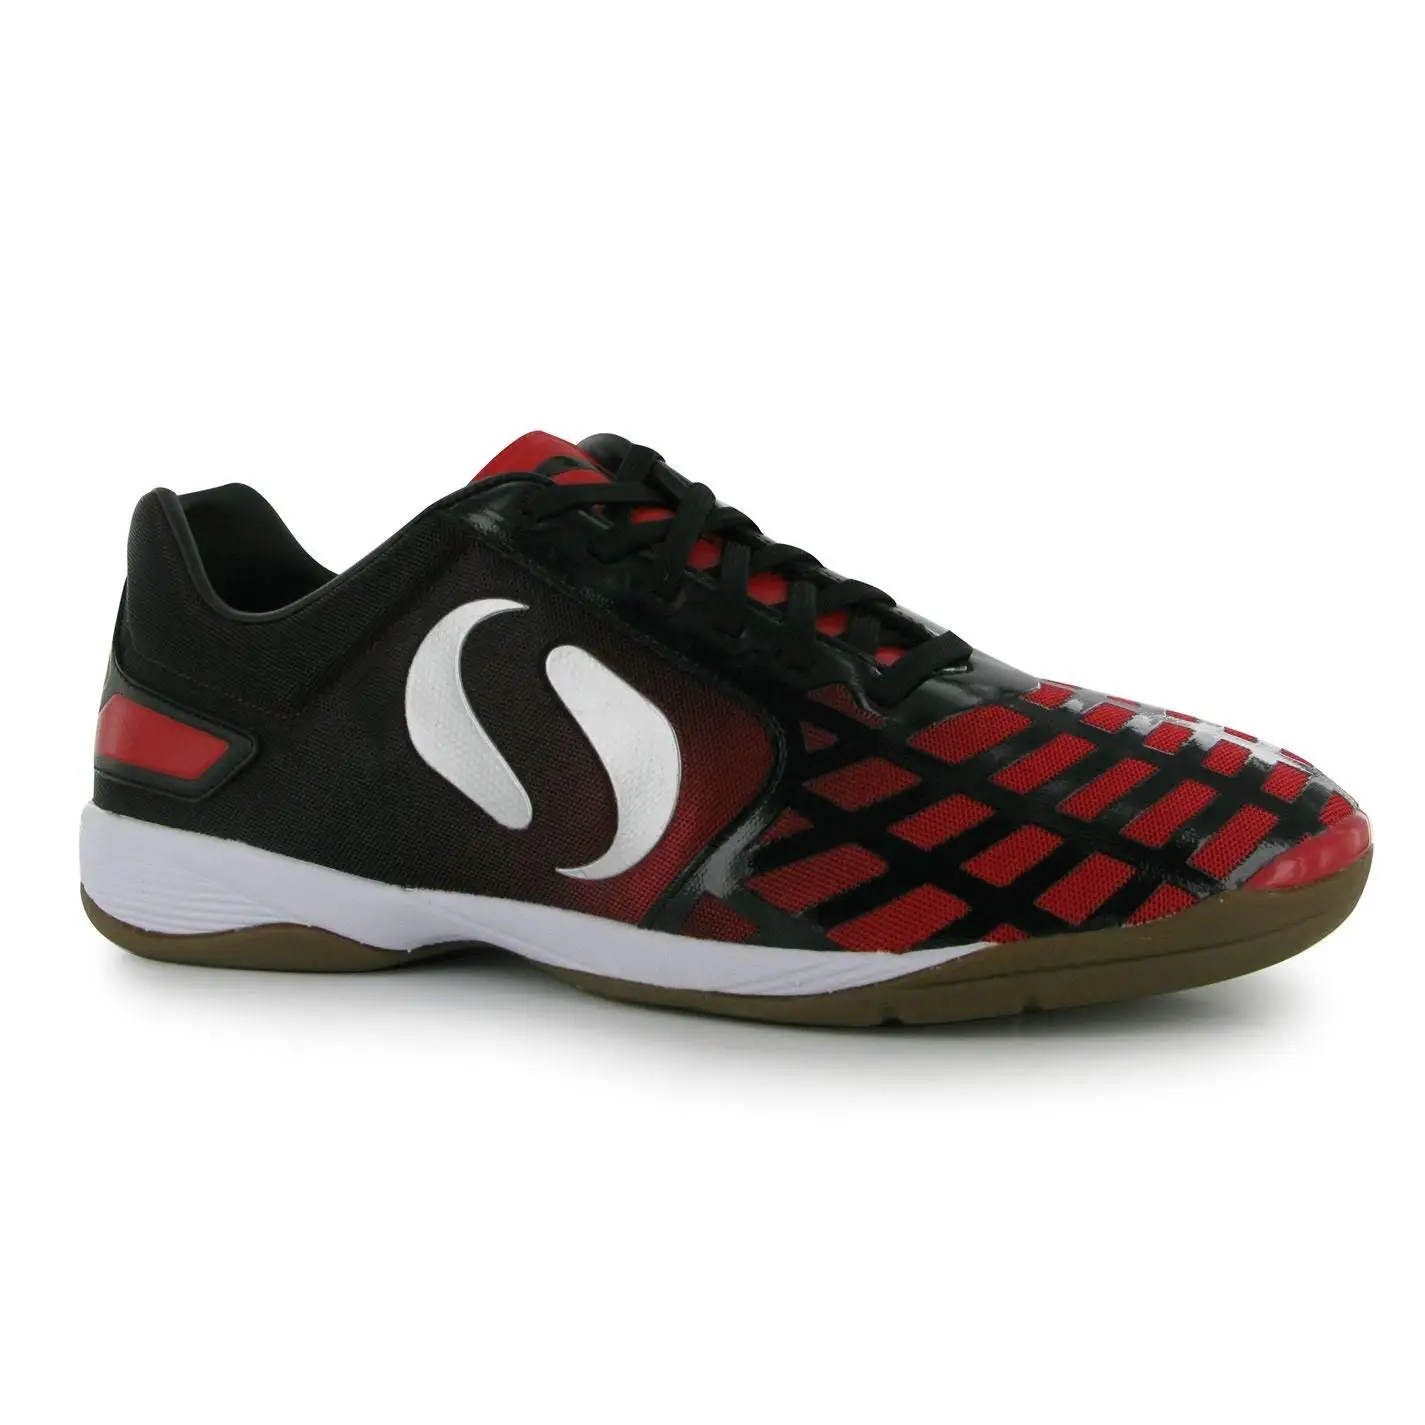 Best Nike Hypervenom Kids and Baby Shoes Price List in